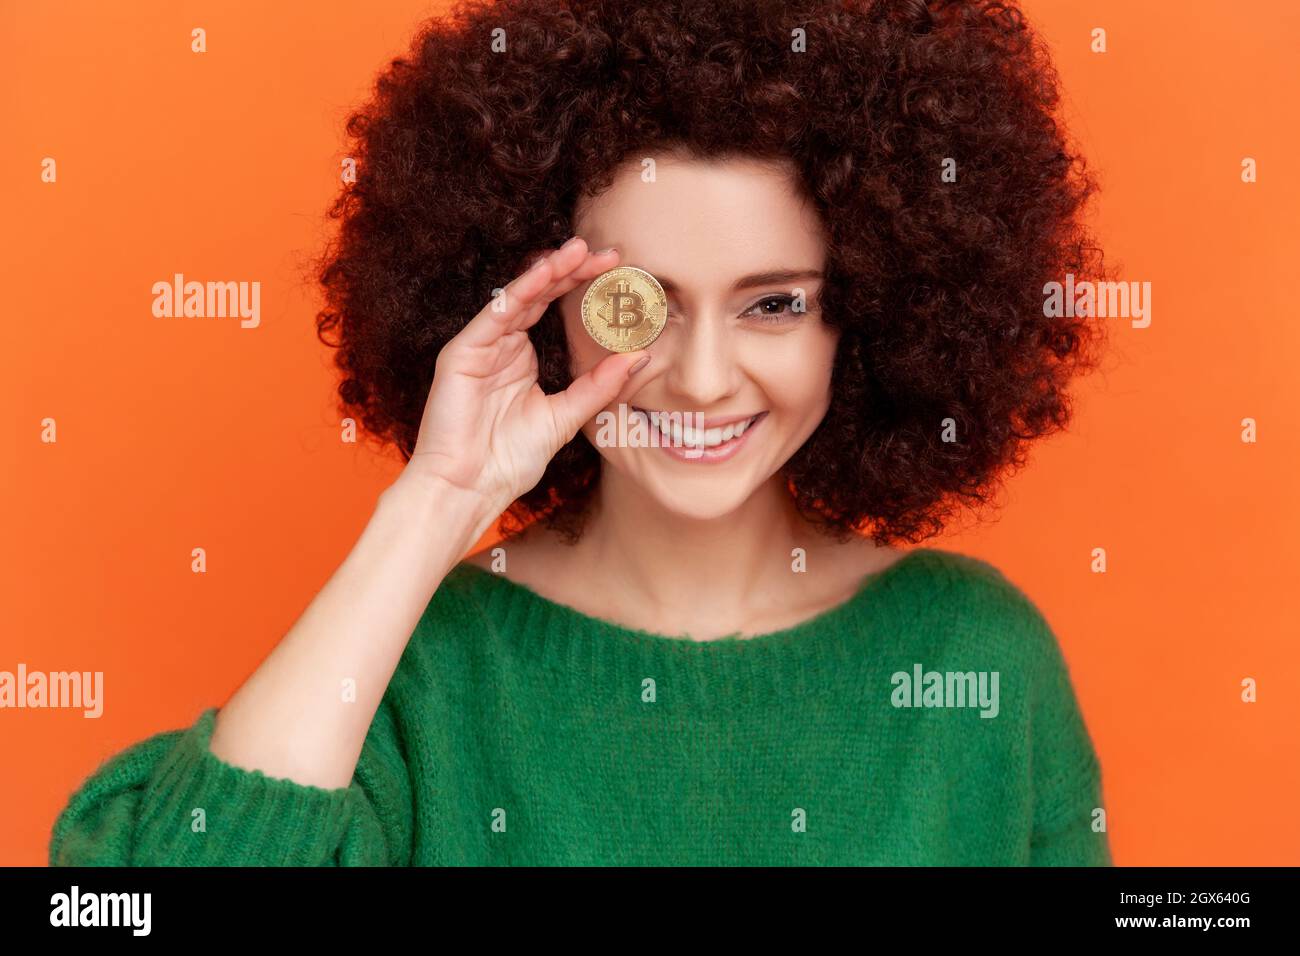 Portrait of happy smiling woman with Afro hairstyle wearing green casual style sweater covering eye with gold bitcoin, blockchain concept. Indoor studio shot isolated on orange background. Stock Photo